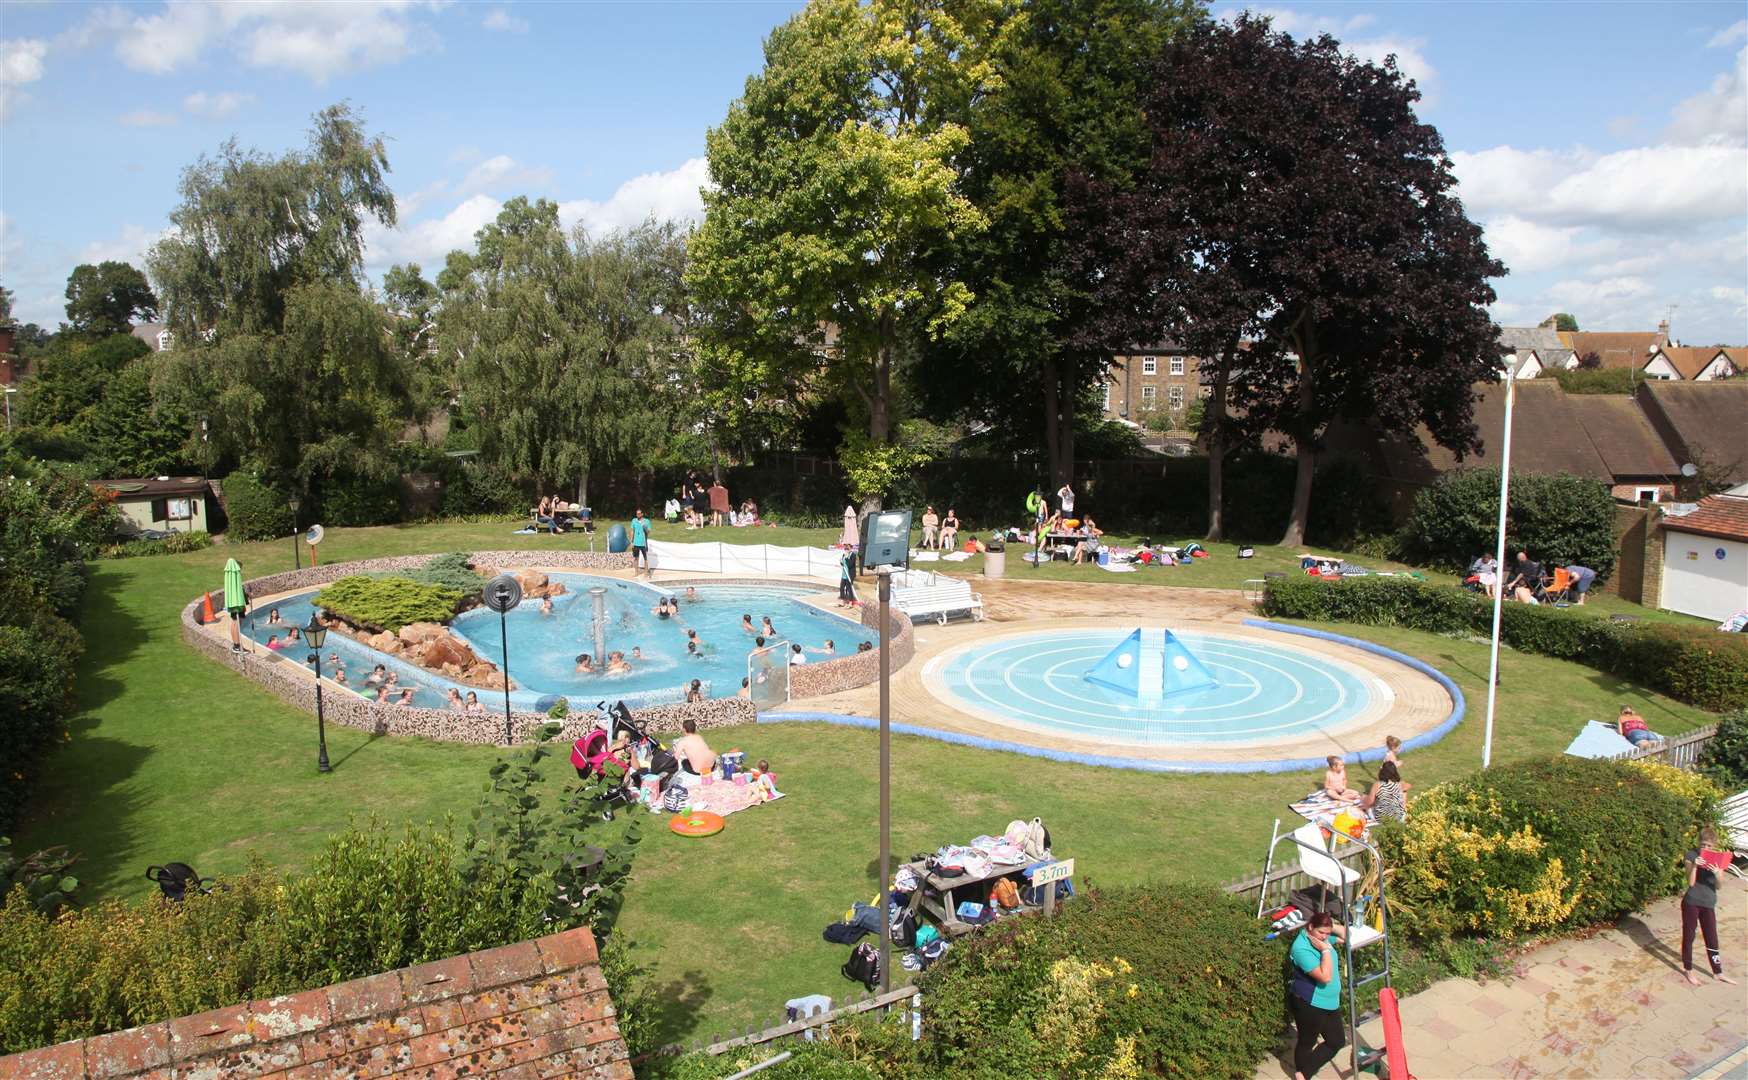 Faversham Pools has been rated second-best outdoor swimming facility in the country by the Daily Mail